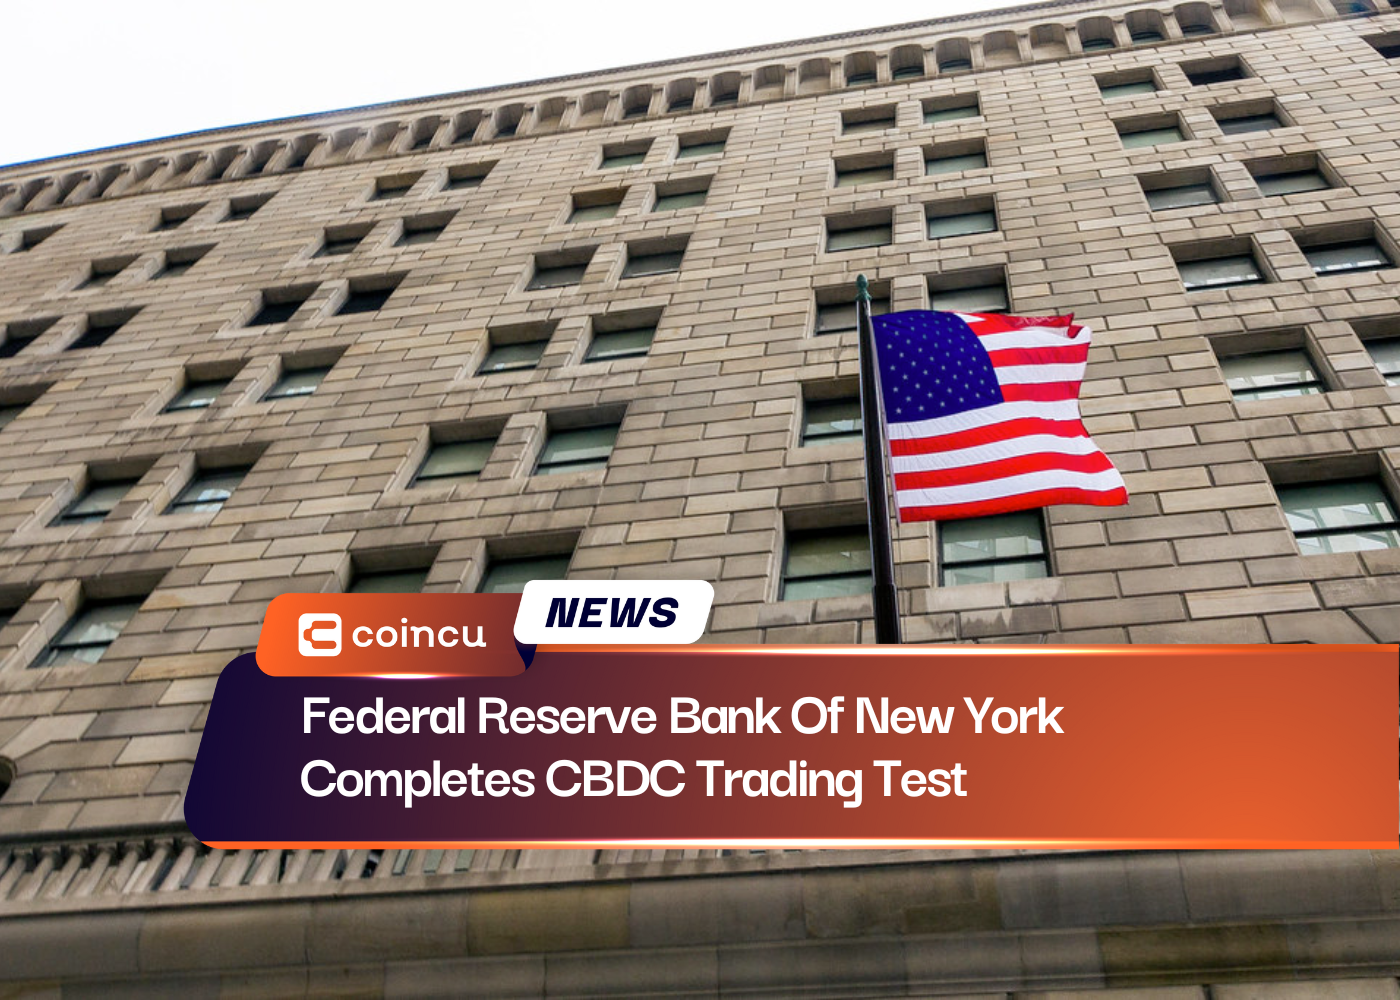 Federal Reserve Bank Of New York Completes CBDC Trading Test